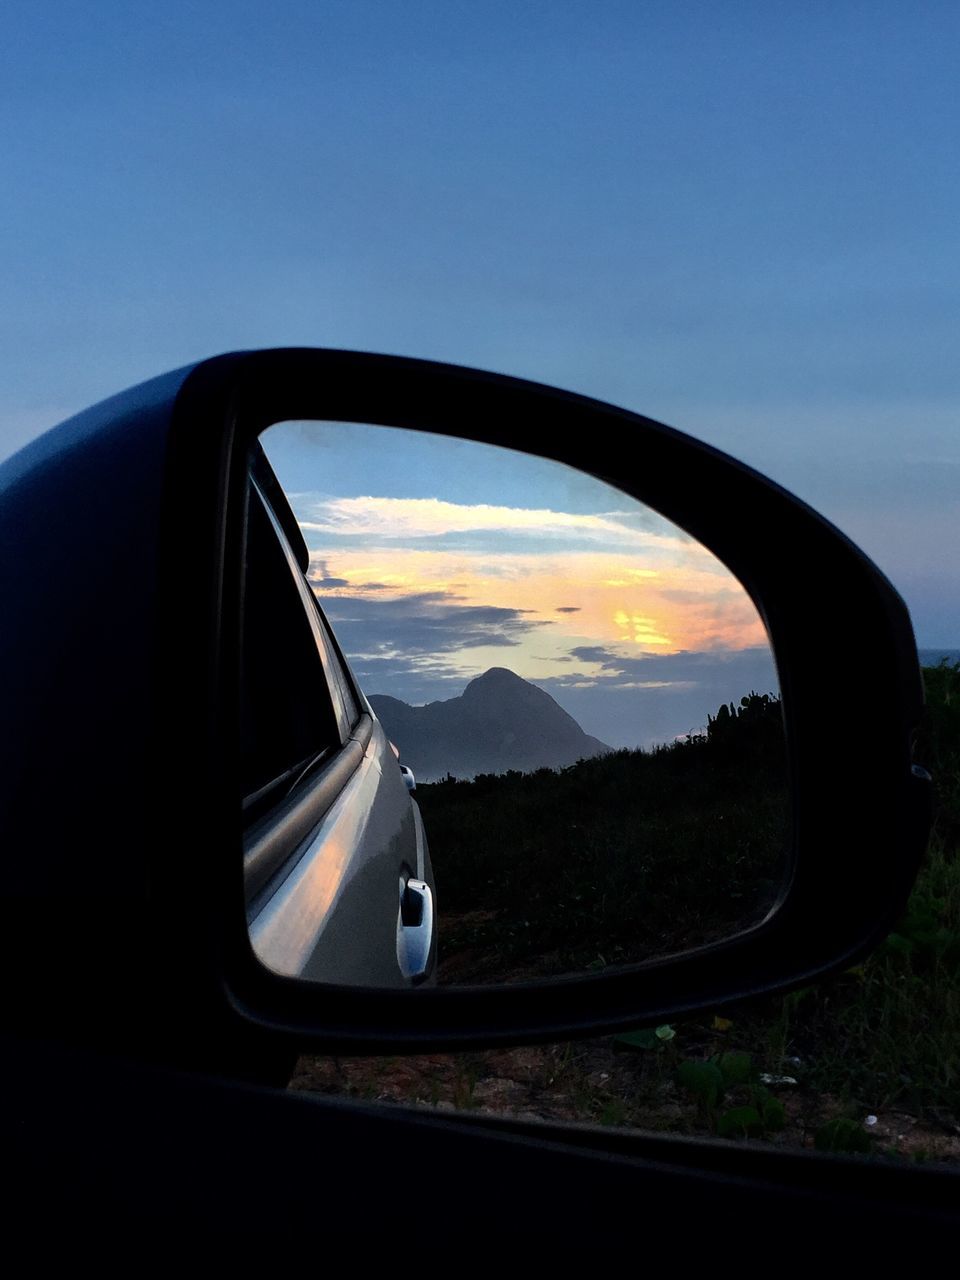 car, sky, transportation, sunset, no people, road, side-view mirror, outdoors, mountain, close-up, vehicle mirror, day